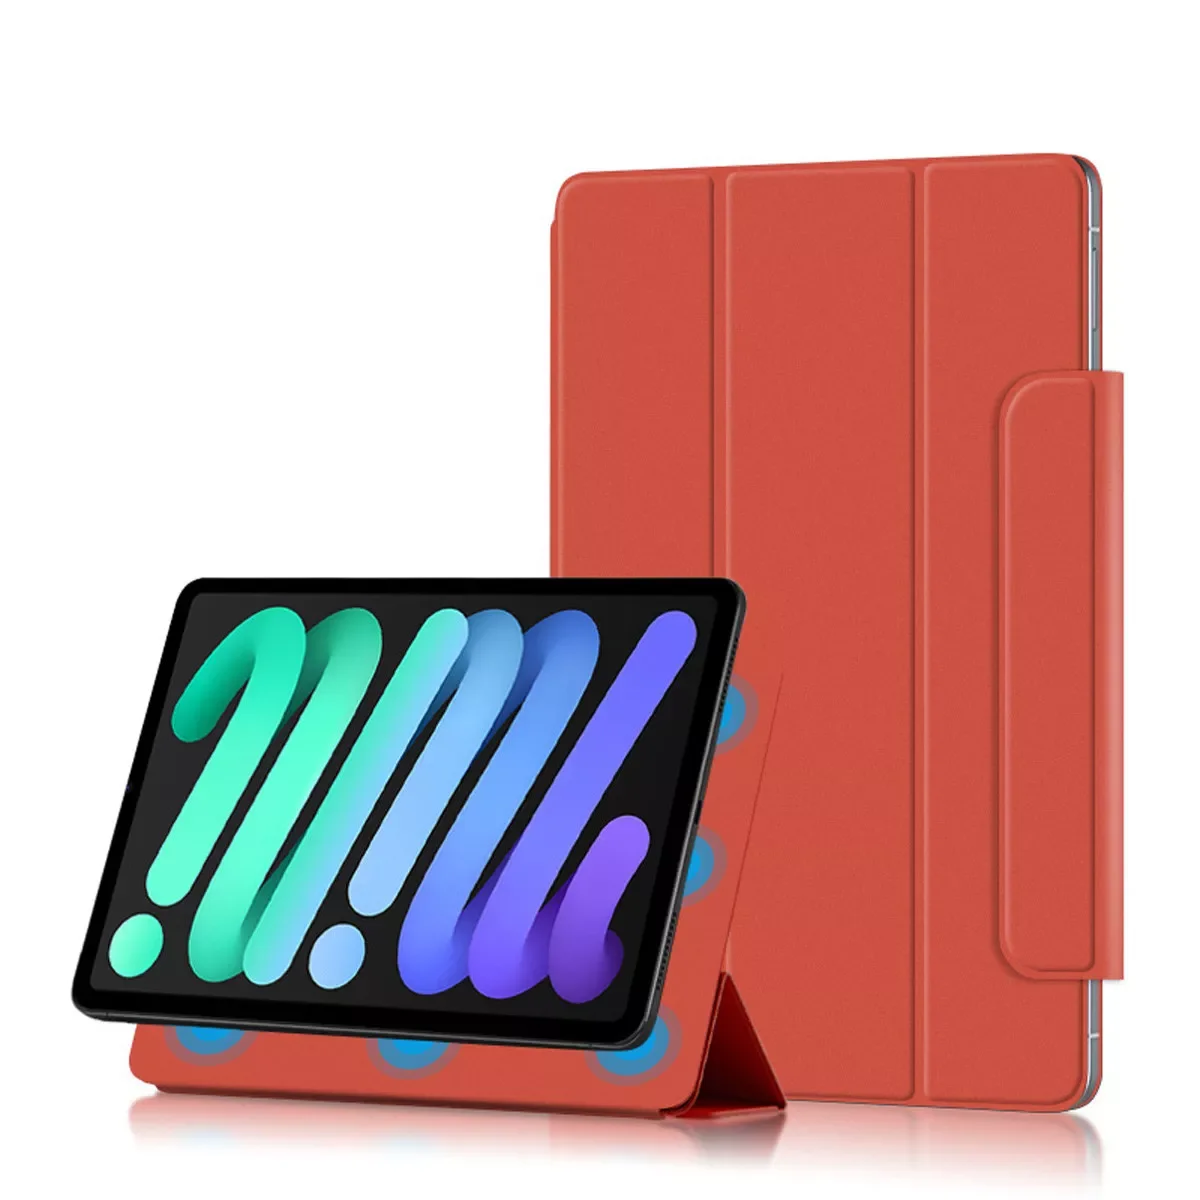 Case For Ipad Mini 6, Supports Auto Sleep/wake And Pencil 2nd Gen Charging, Lightweight Trifold Stand Cover #3